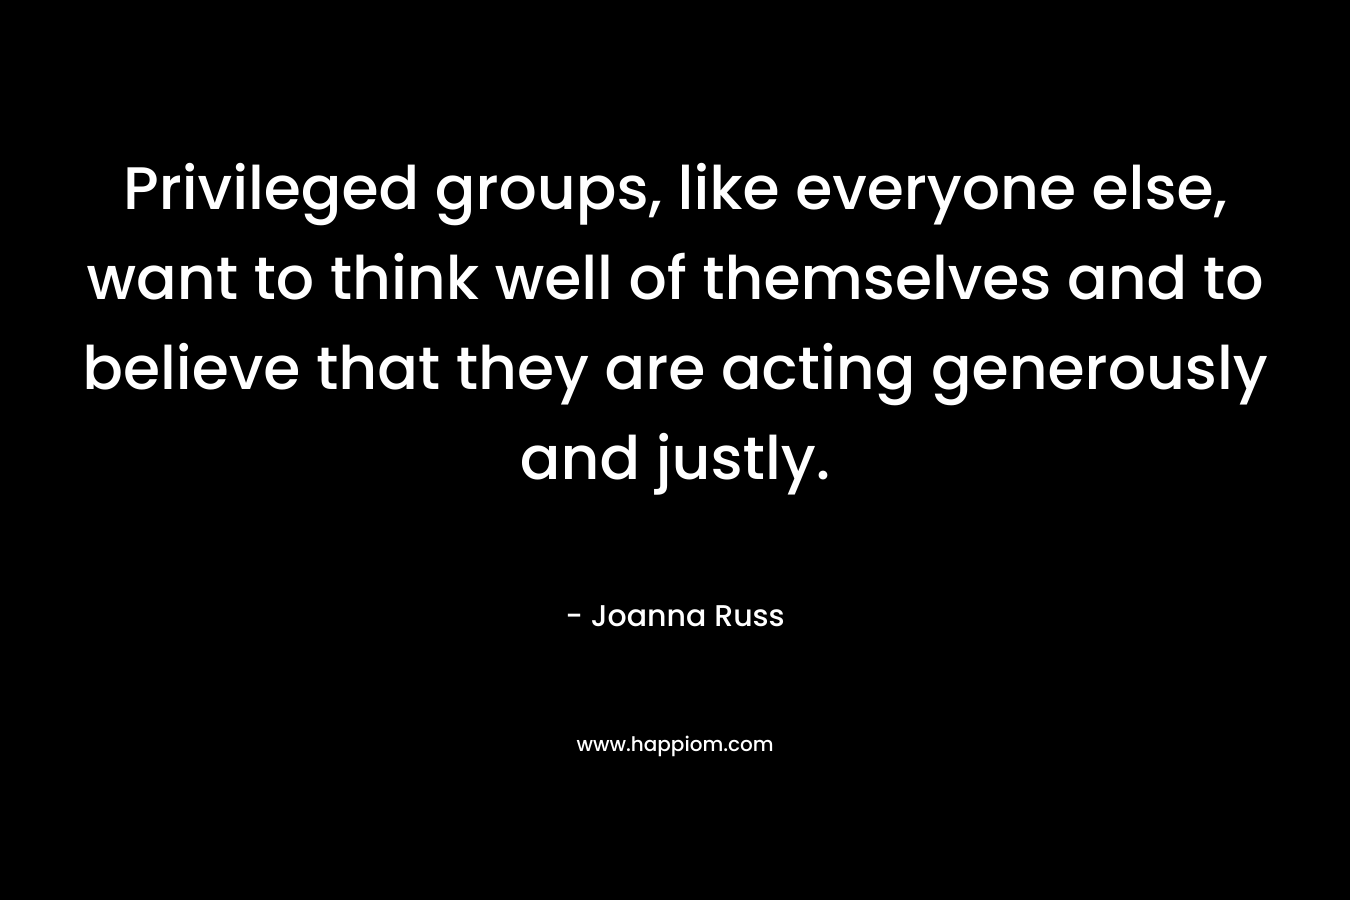 Privileged groups, like everyone else, want to think well of themselves and to believe that they are acting generously and justly.